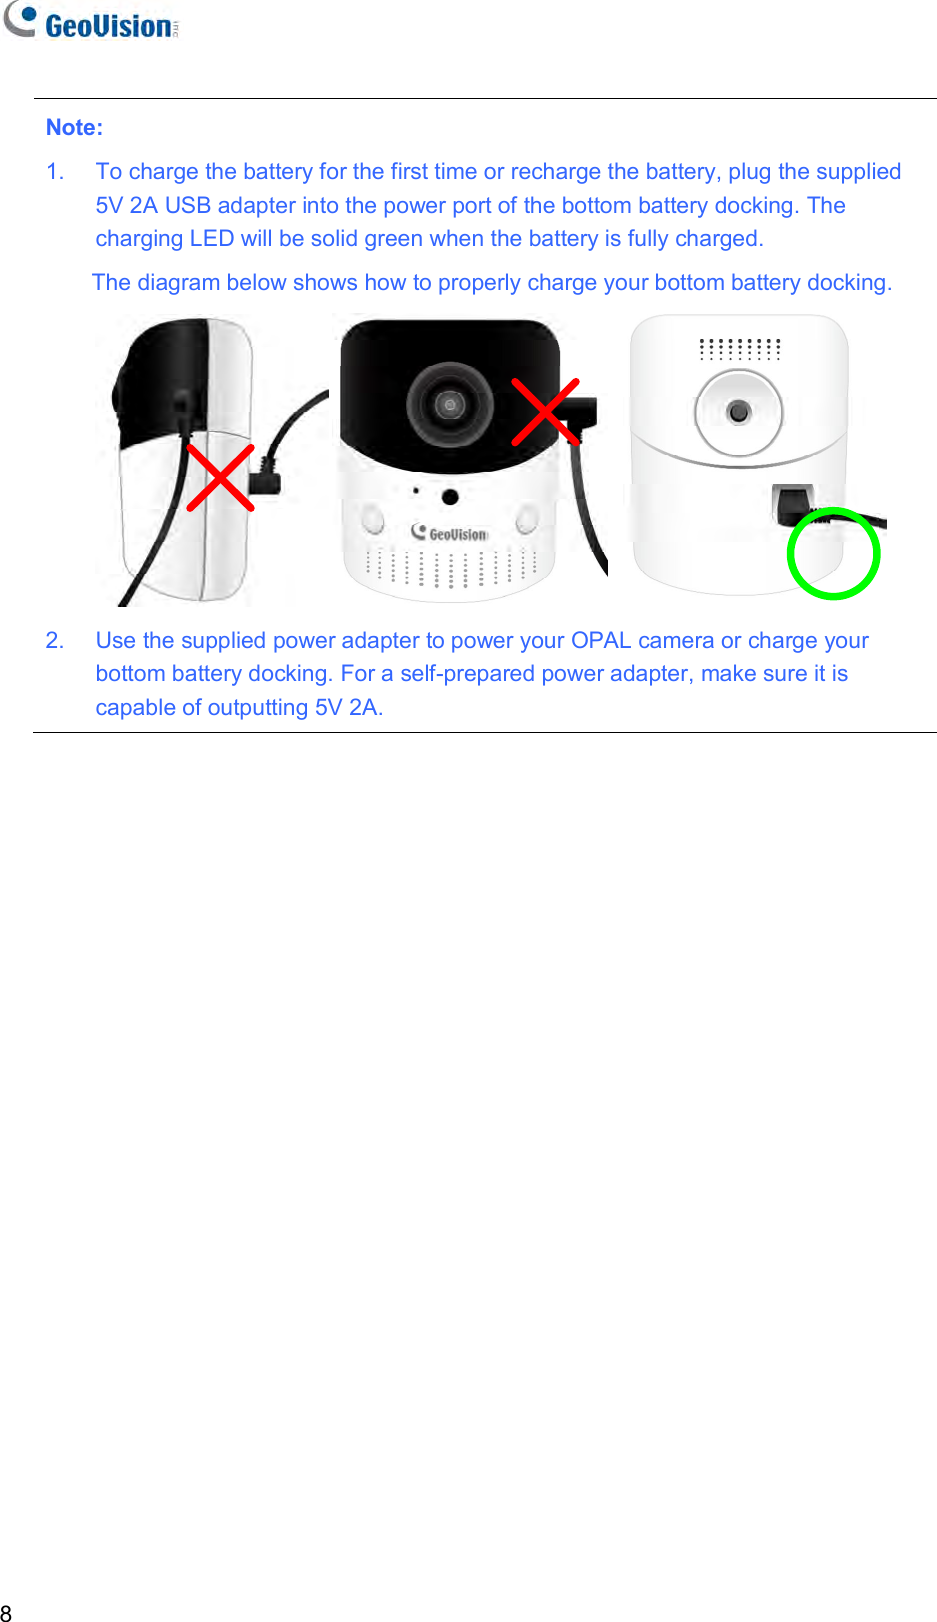   8 Note:  1.  To charge the battery for the first time or recharge the battery, plug the supplied 5V 2A USB adapter into the power port of the bottom battery docking. The charging LED will be solid green when the battery is fully charged.  The diagram below shows how to properly charge your bottom battery docking.  2.  Use the supplied power adapter to power your OPAL camera or charge your bottom battery docking. For a self-prepared power adapter, make sure it is capable of outputting 5V 2A.  